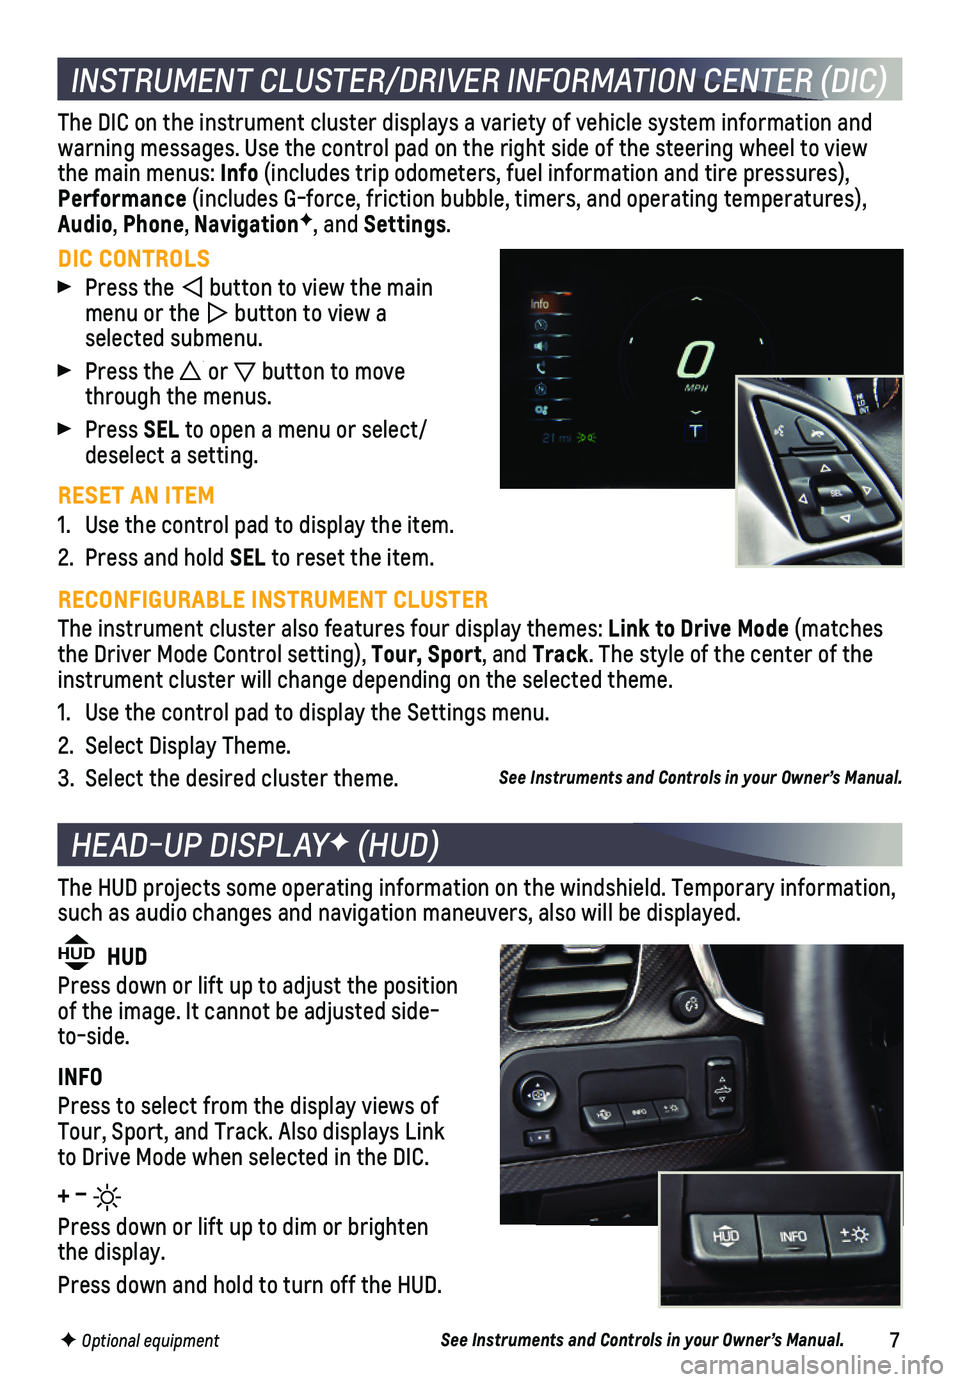 CHEVROLET CORVETTE 2018  Get To Know Guide 7
INSTRUMENT CLUSTER/DRIVER INFORMATION CENTER (DIC)
DIC CONTROLS
 Press the  button to view the main menu or the  button to view a  selected  submenu.
 Press the  or  button to move through the menus